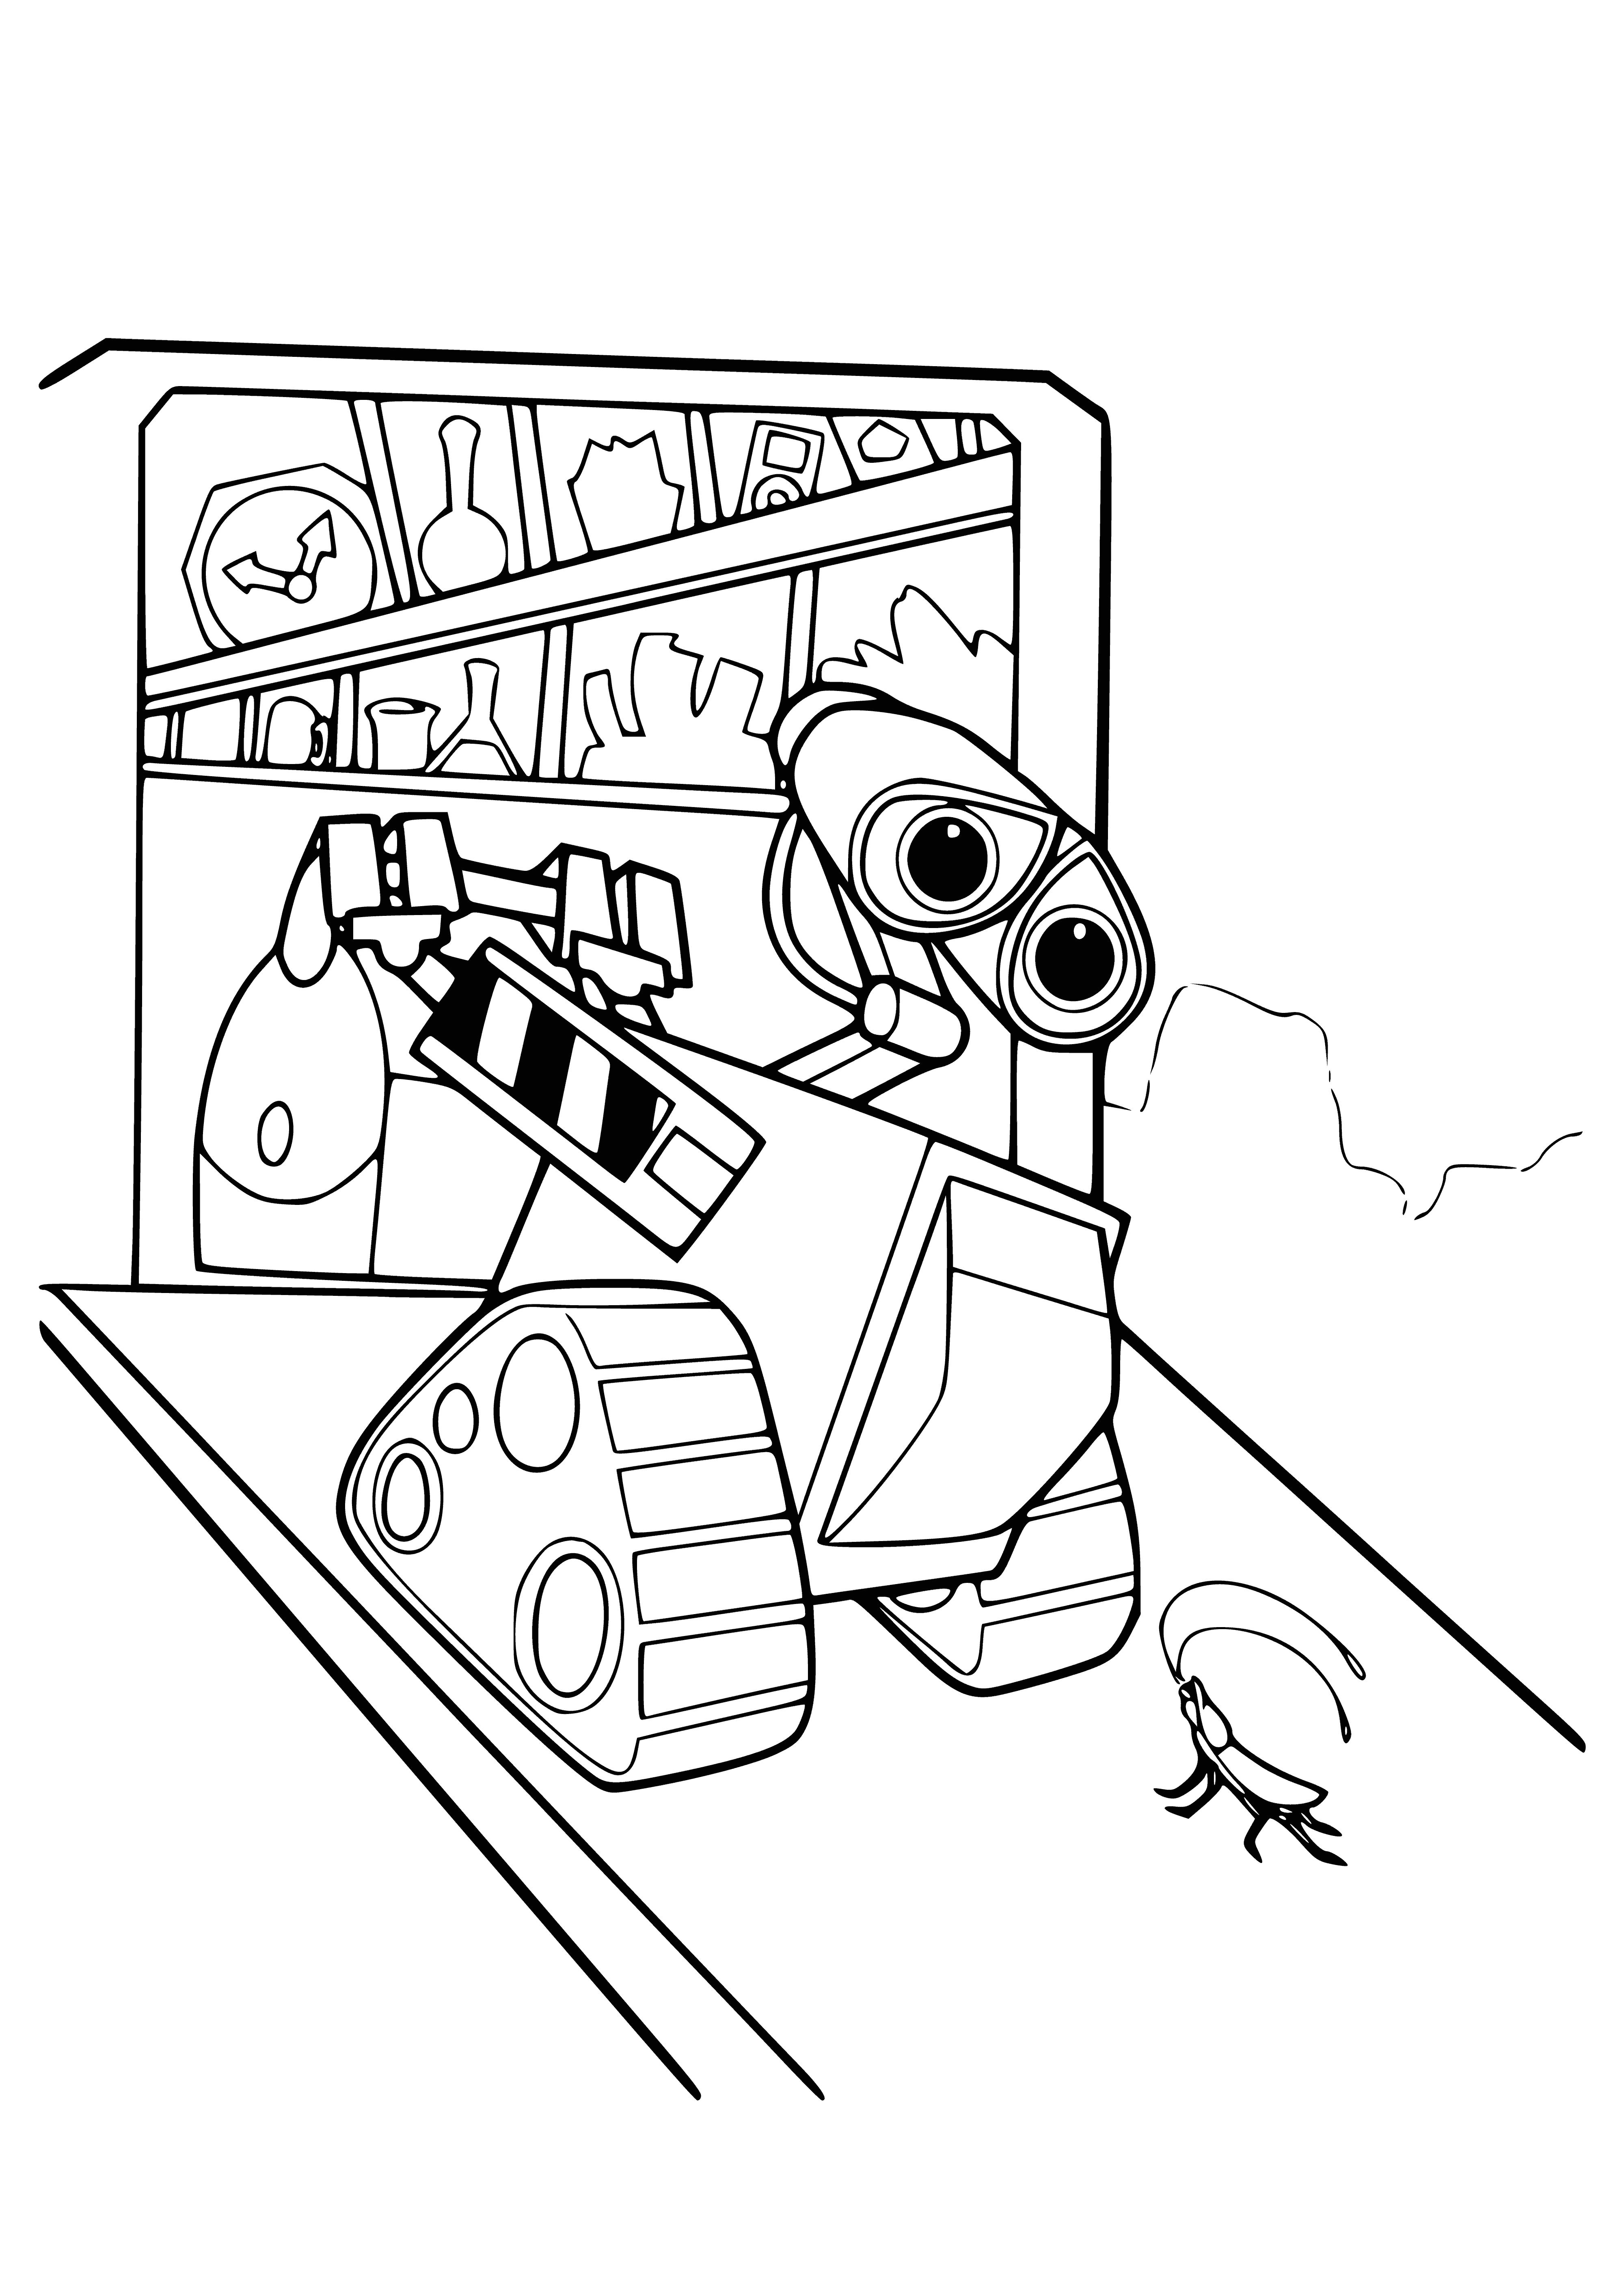 Valley and cockroach coloring page